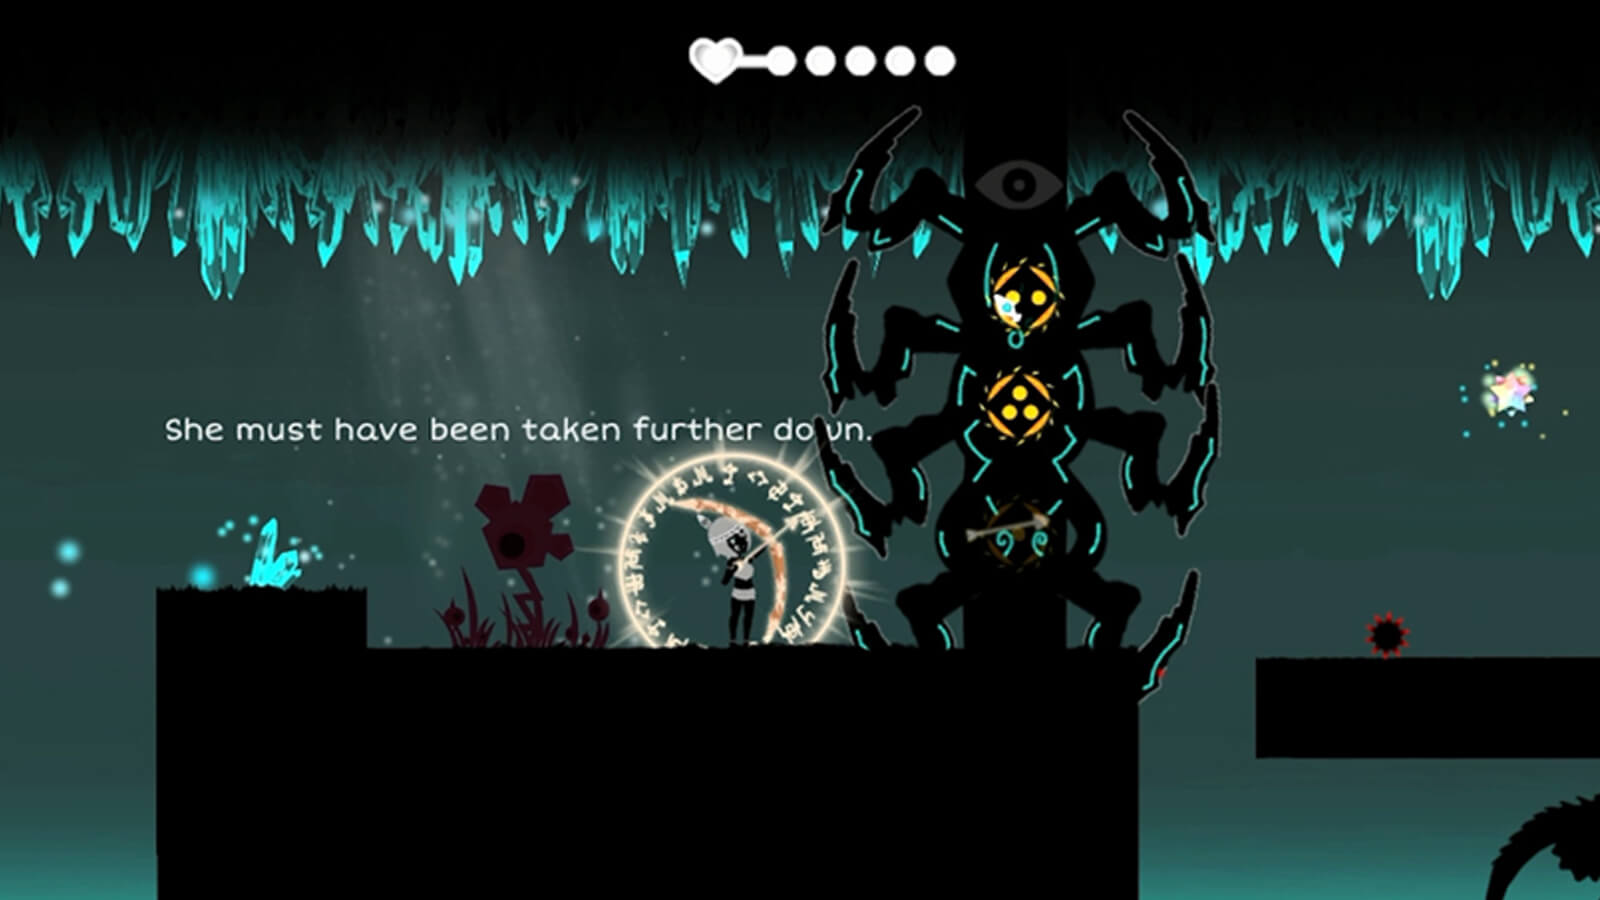 The player's character aims a glowing white arrow at a shadowy totem-like enemy